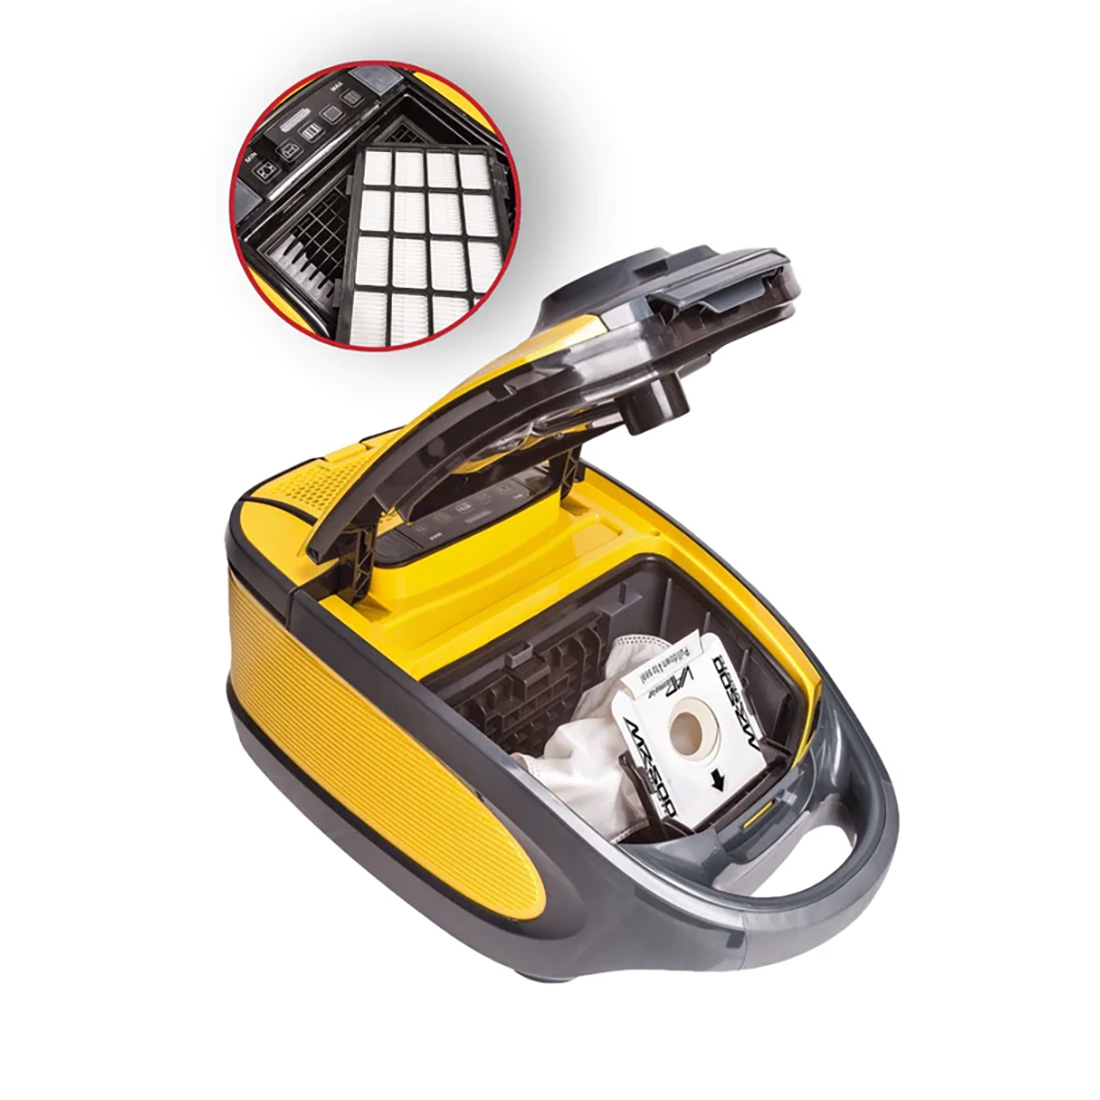 Vapamore MR-500 Vento Canister Vacuum Cleaner 